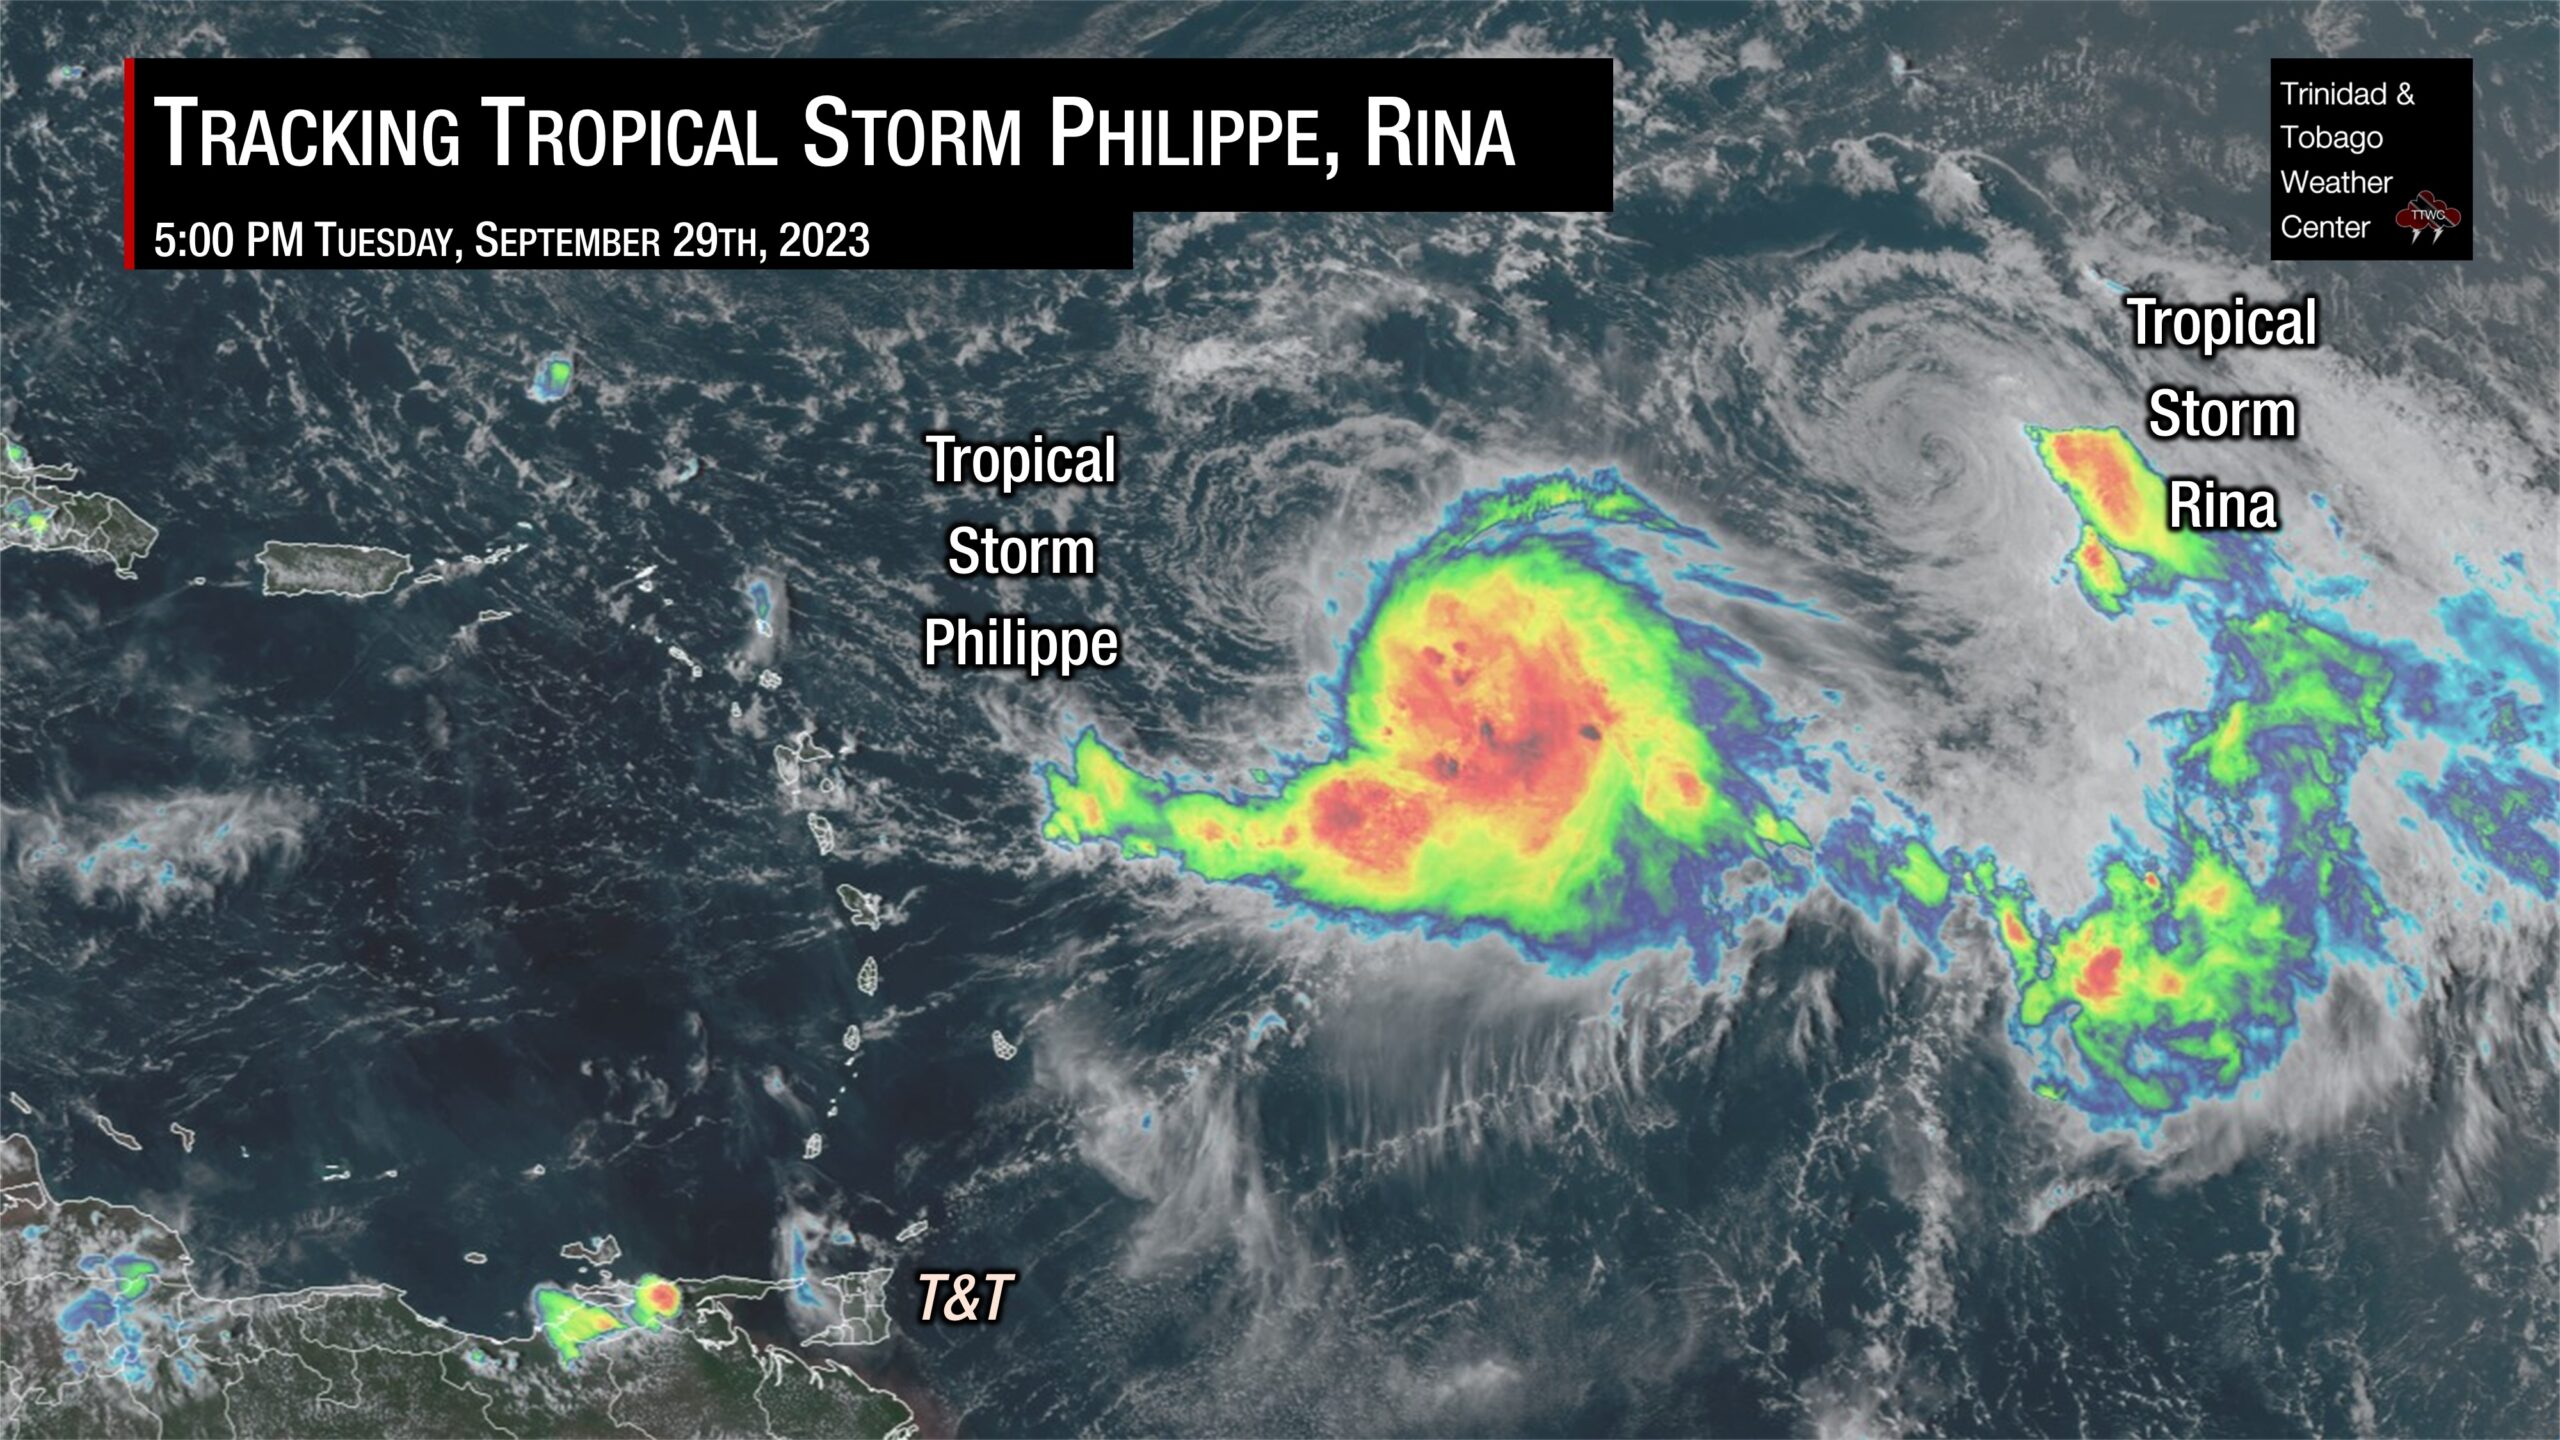 Tropical Update Tracking Tropical Storm Philippe, Rina Trinidad and